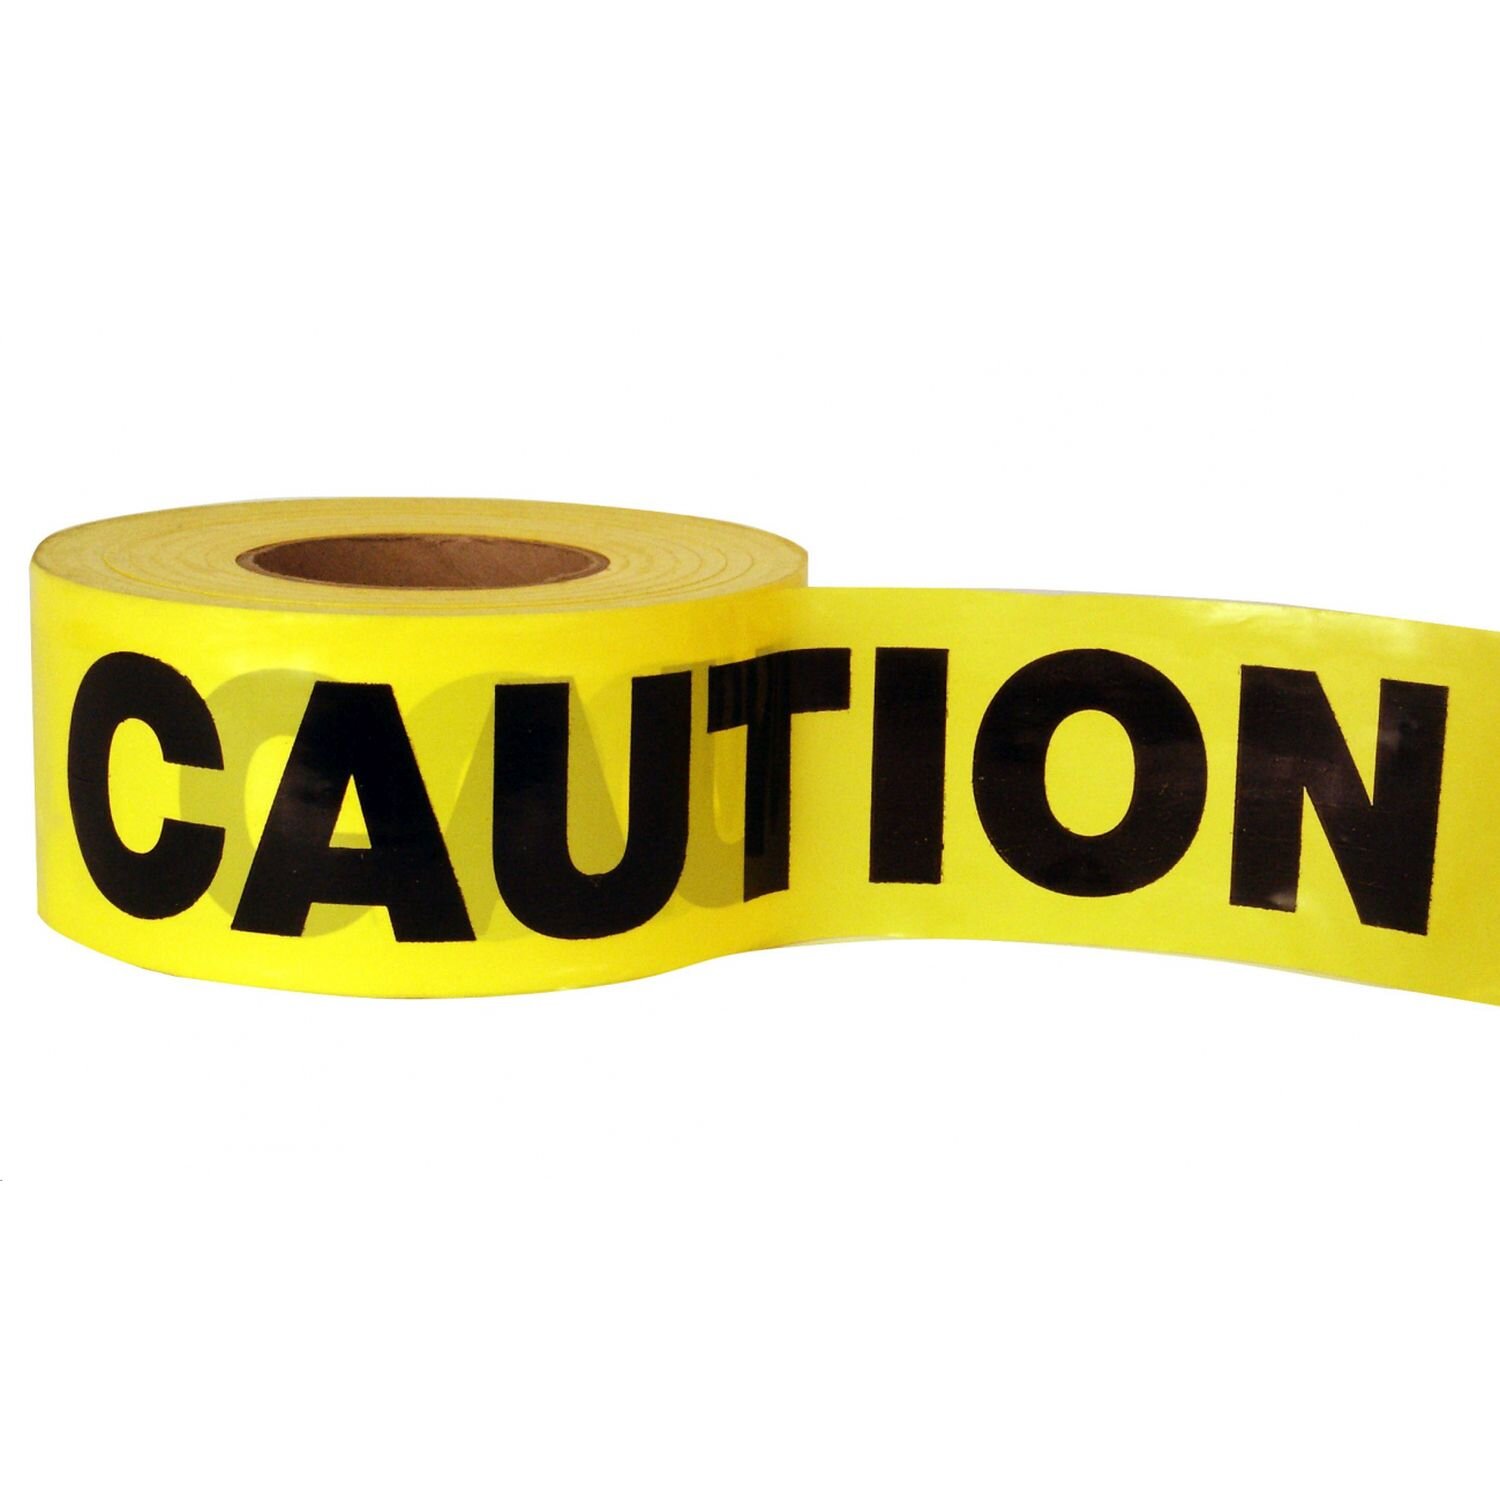 Barrier Tape Caution Yel/Blk 75mm x 300m